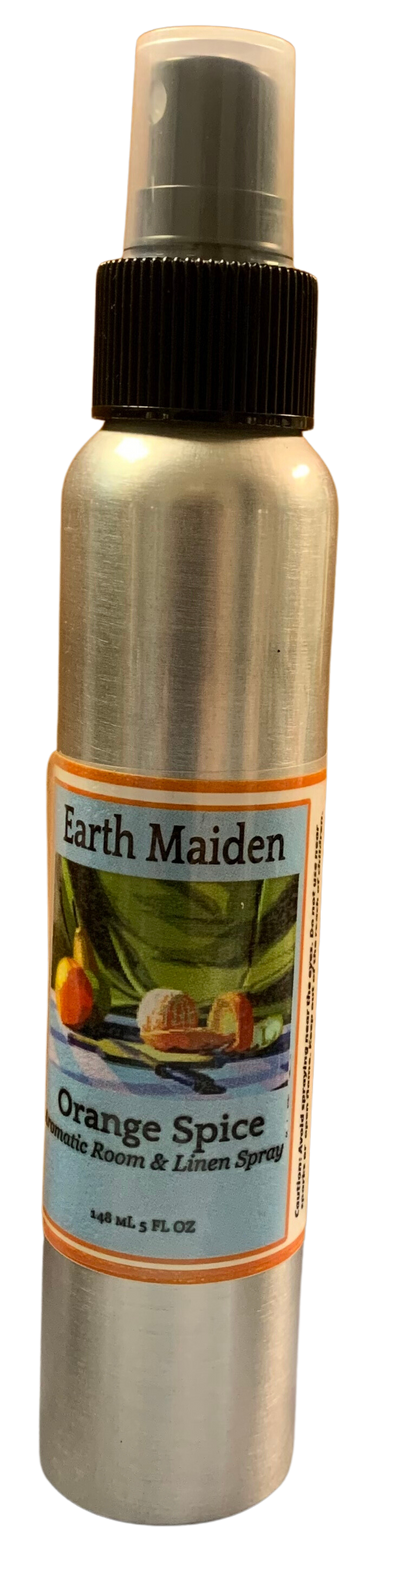 All Natural “Orange Spice” Aroma Mist with Sweet Orange, Cinnamon Leaf, Cassia, Clove Bud, Coriander Seed, Anise Essential Oils in 5 ounce metal bullet container with fine mist sprayer.